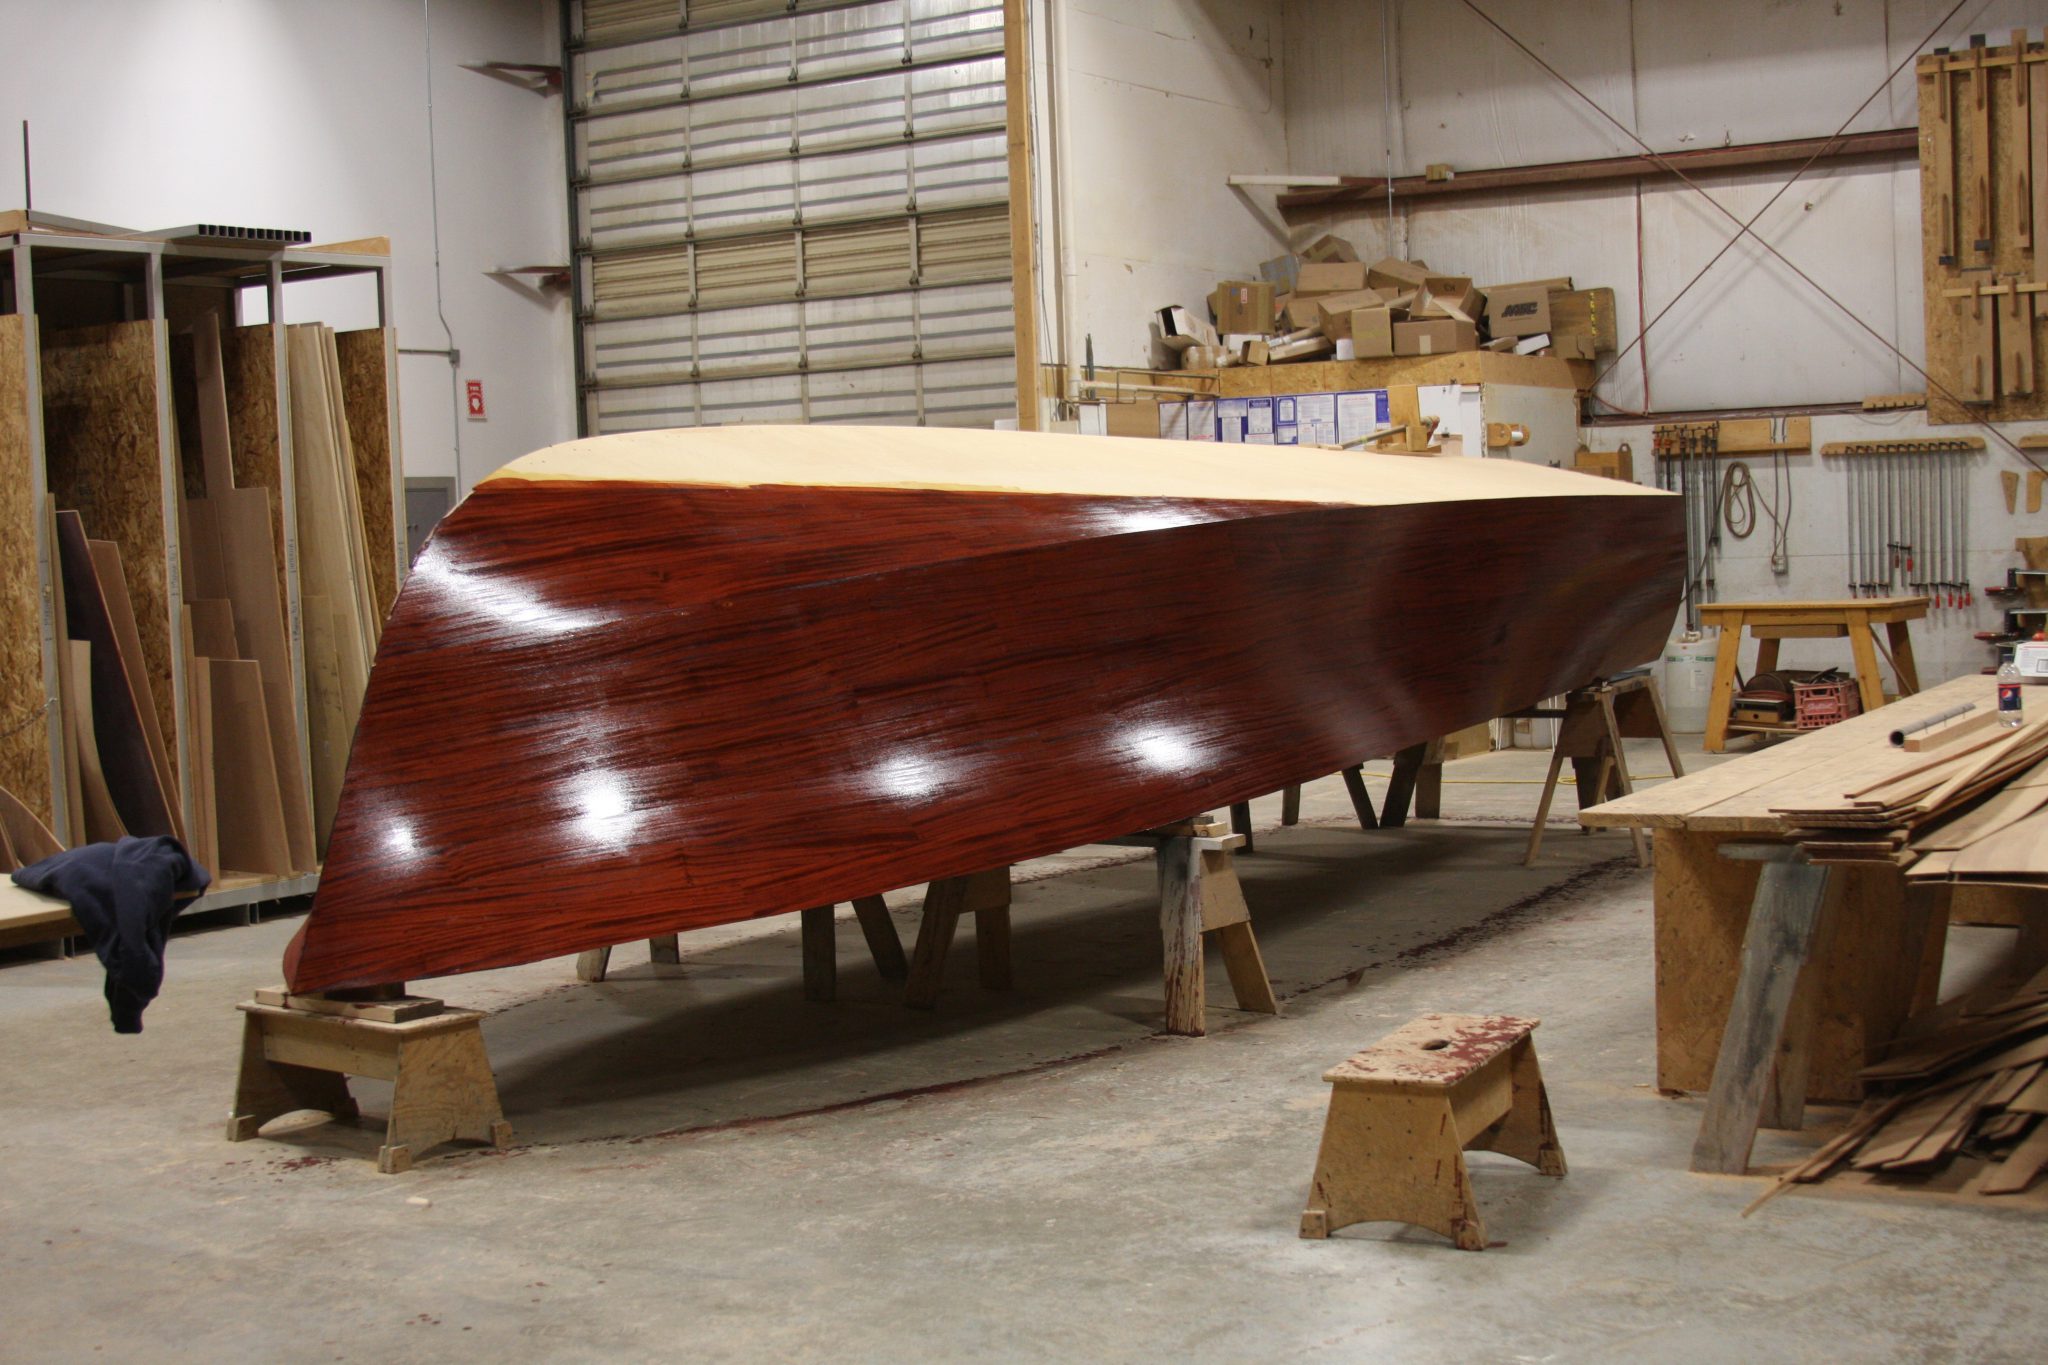 Varnish on hull of 3/4 Time